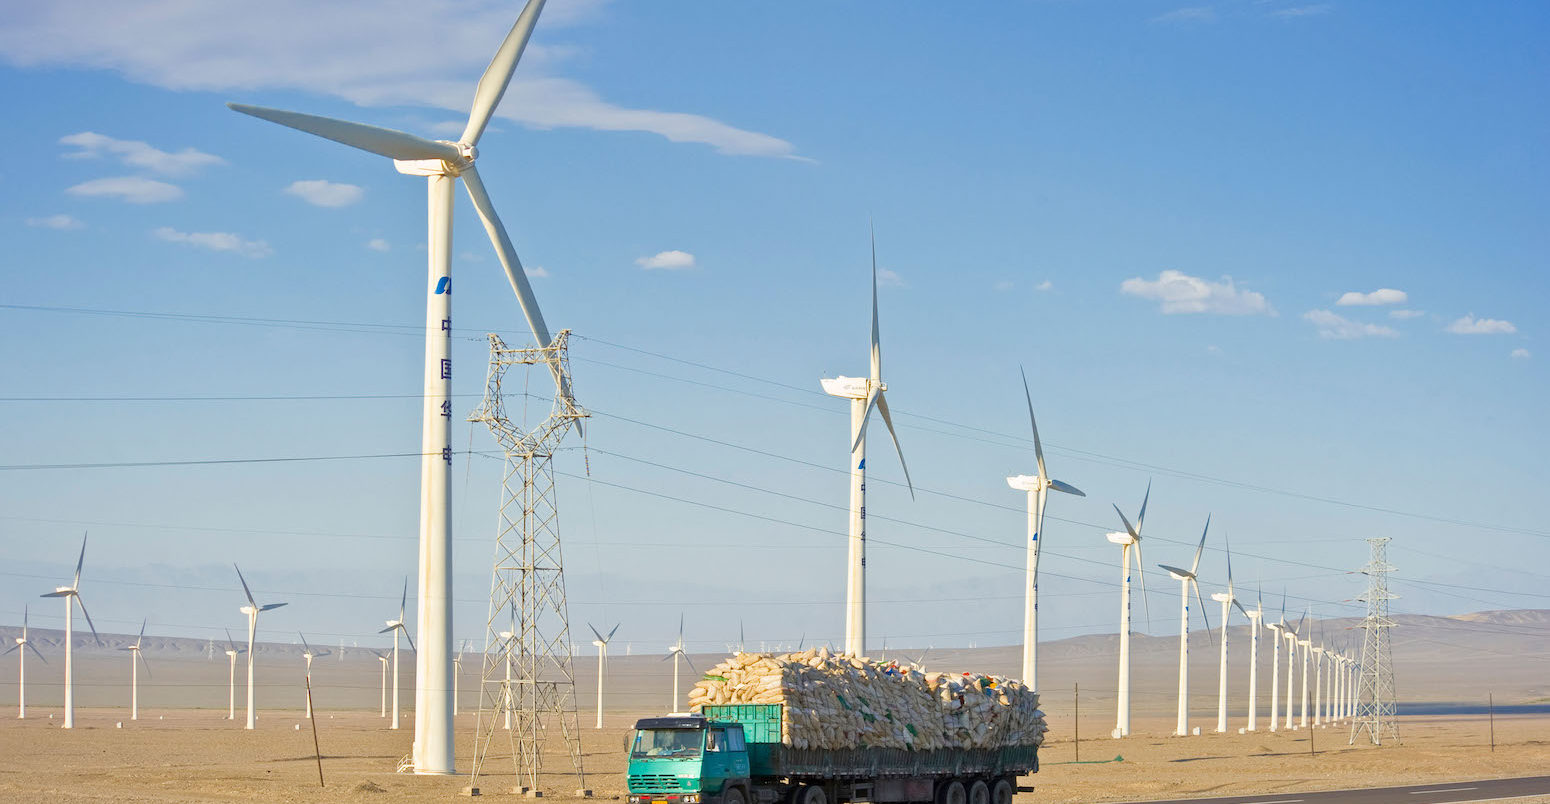 A truck travelling along the G30 Lianhuo expressway with part of the Daheyan wind farm in the background in Xinjiang, China. Credit: Paul Springett D / Alamy Stock Photo